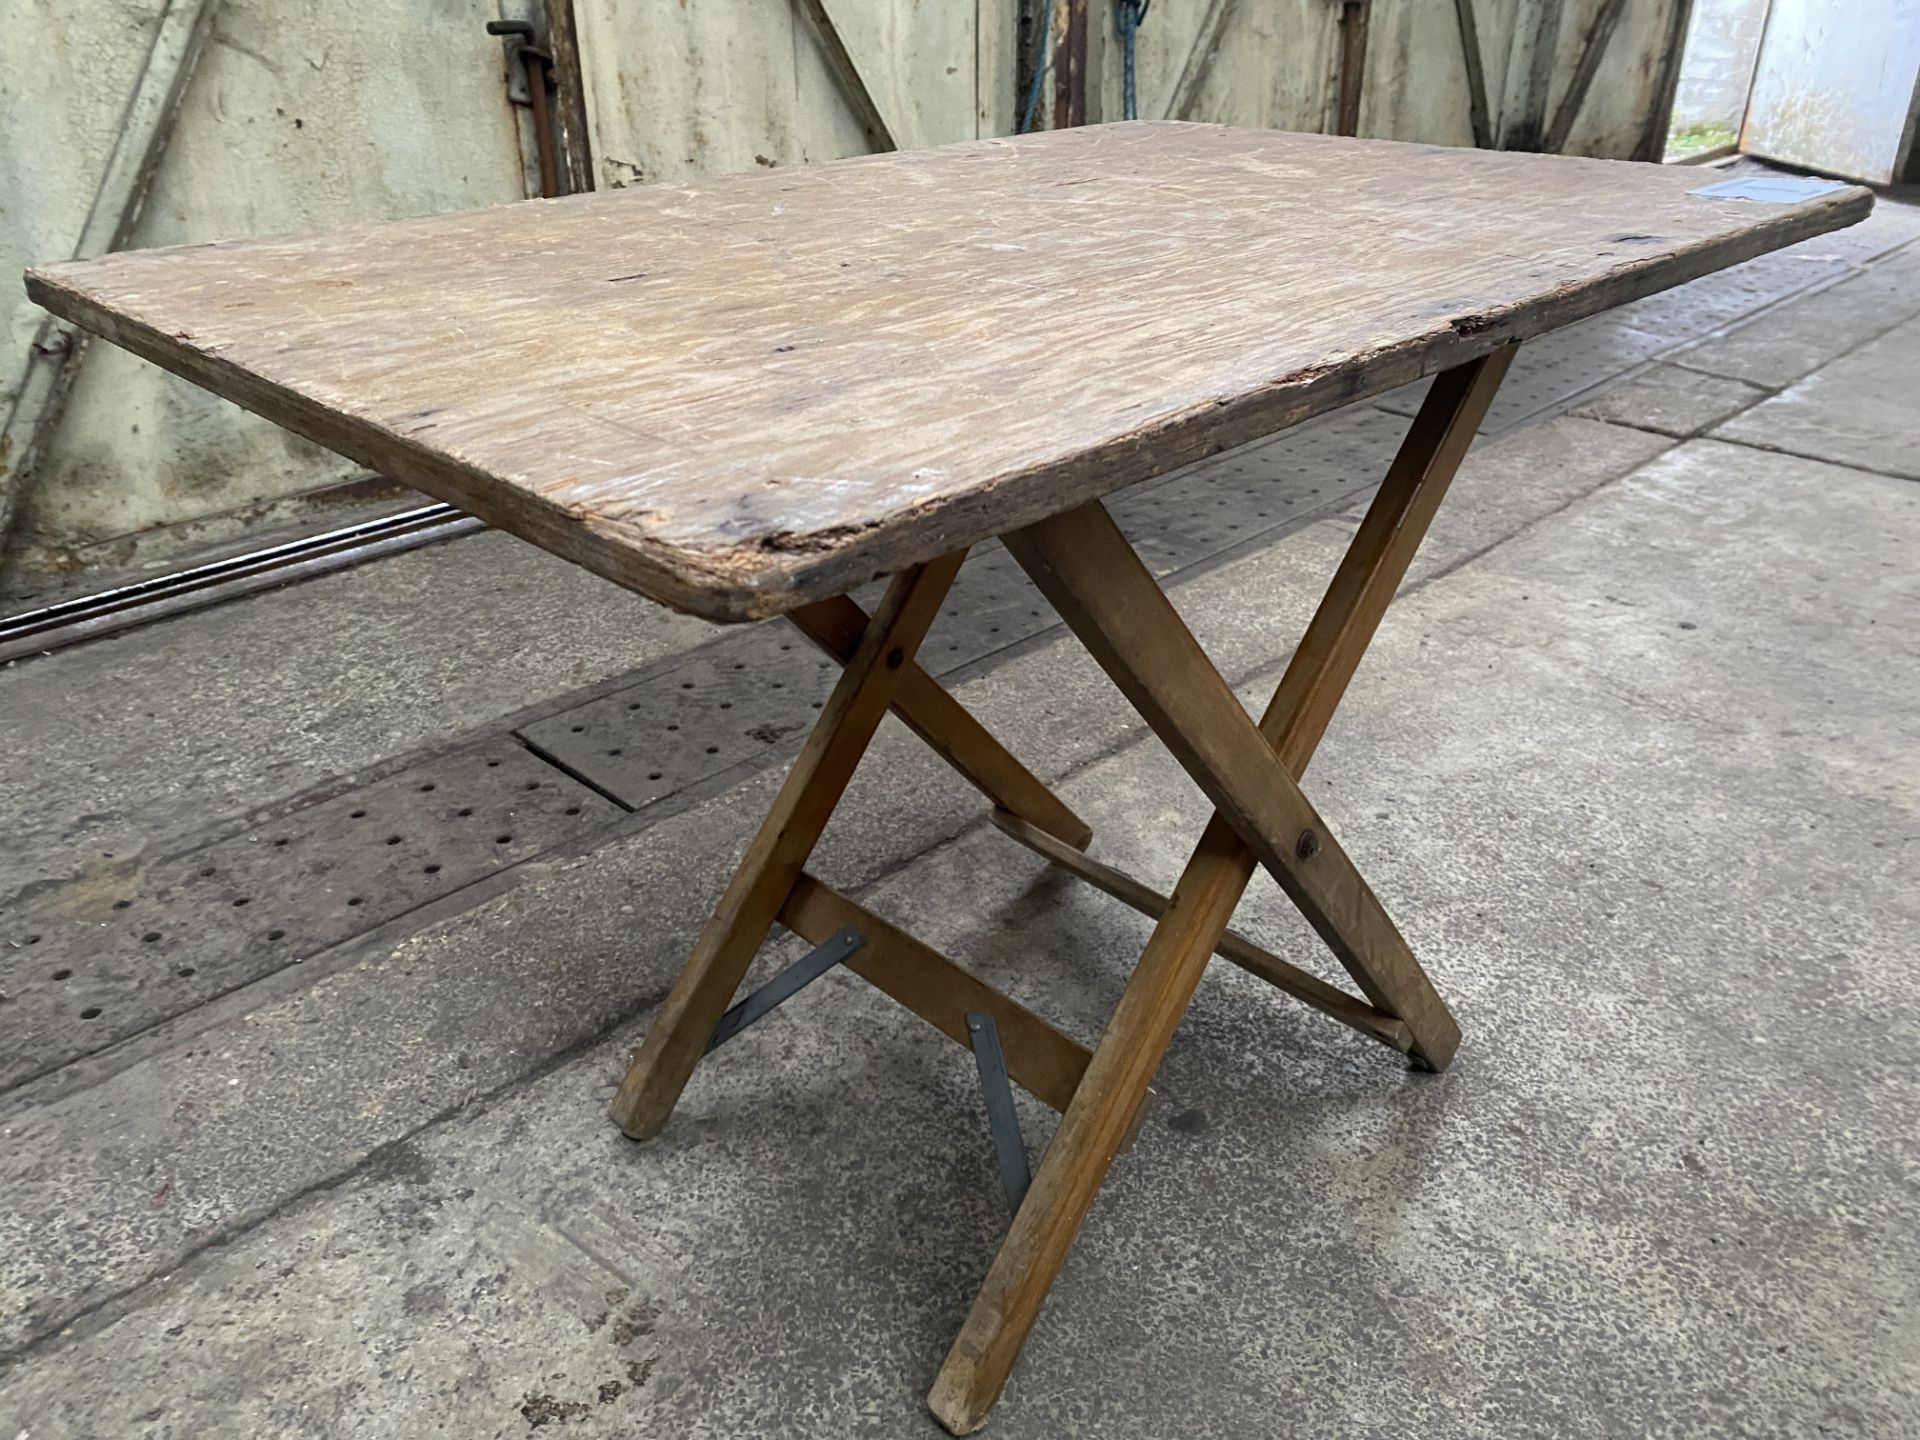 14 no 2ft x 2ft wooden folding tables. This lot is subject to VAT